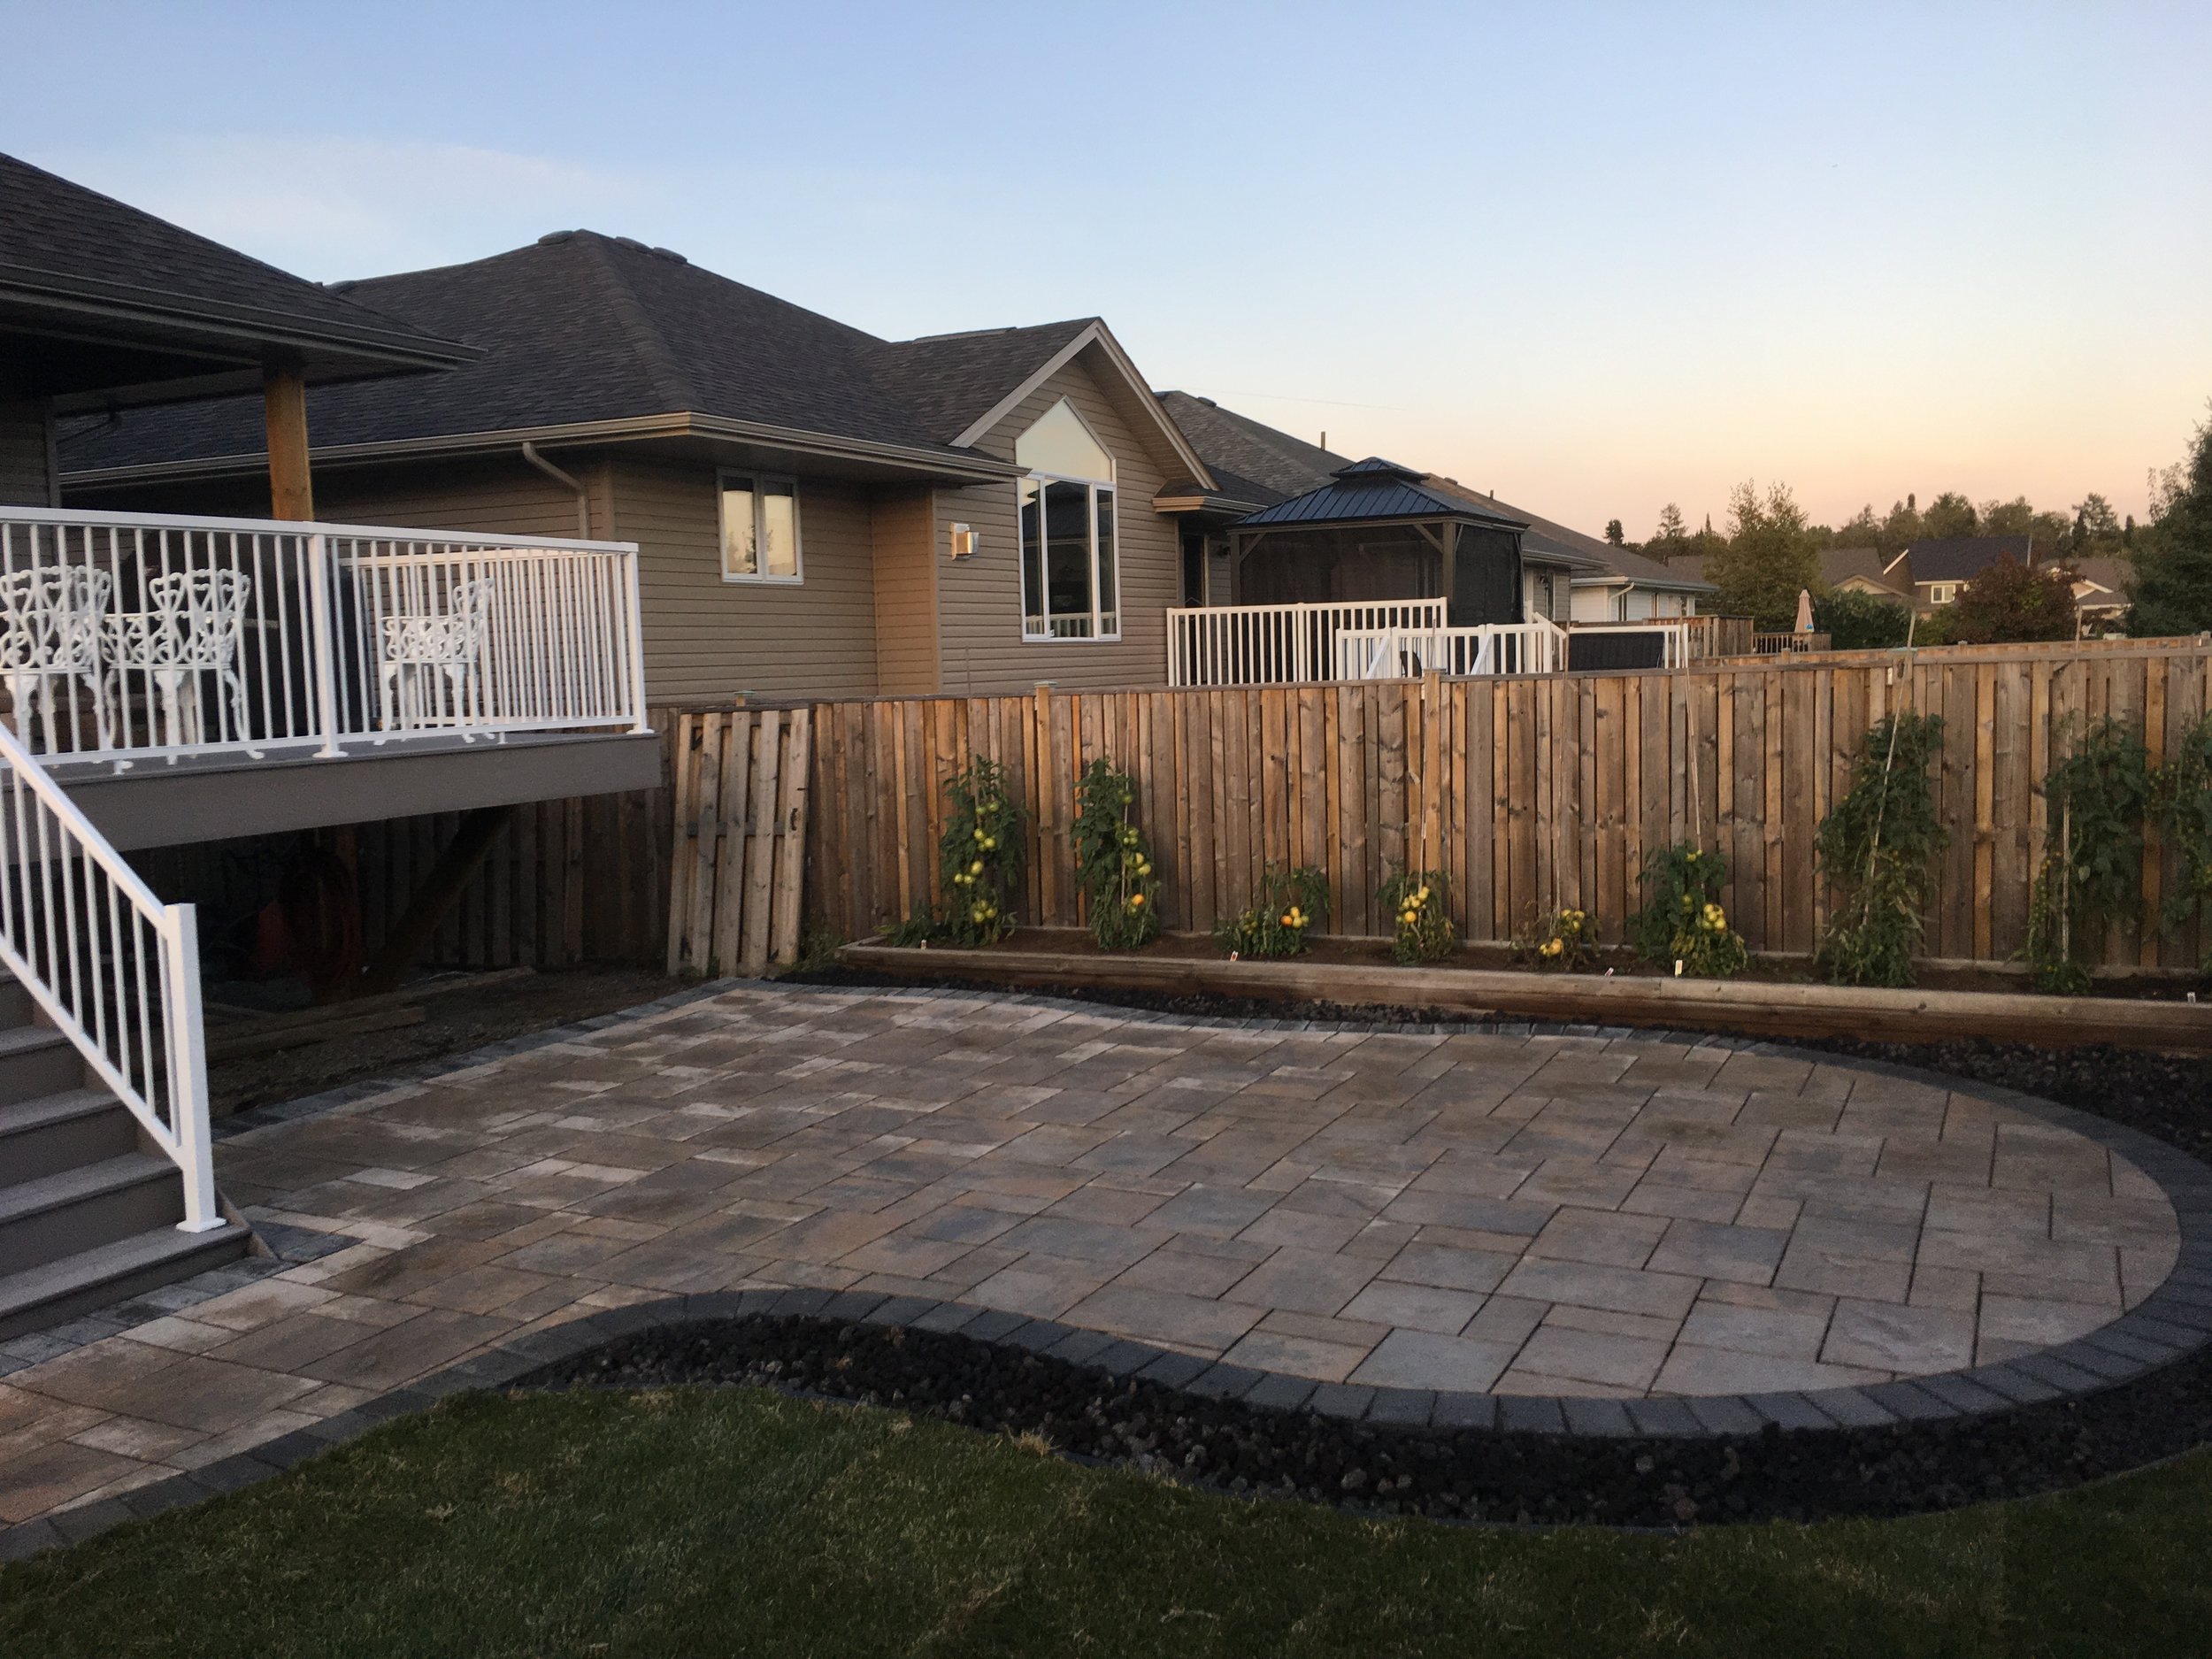 Paving Stone Patio made with Beacon Hill Flagstone from Unilock